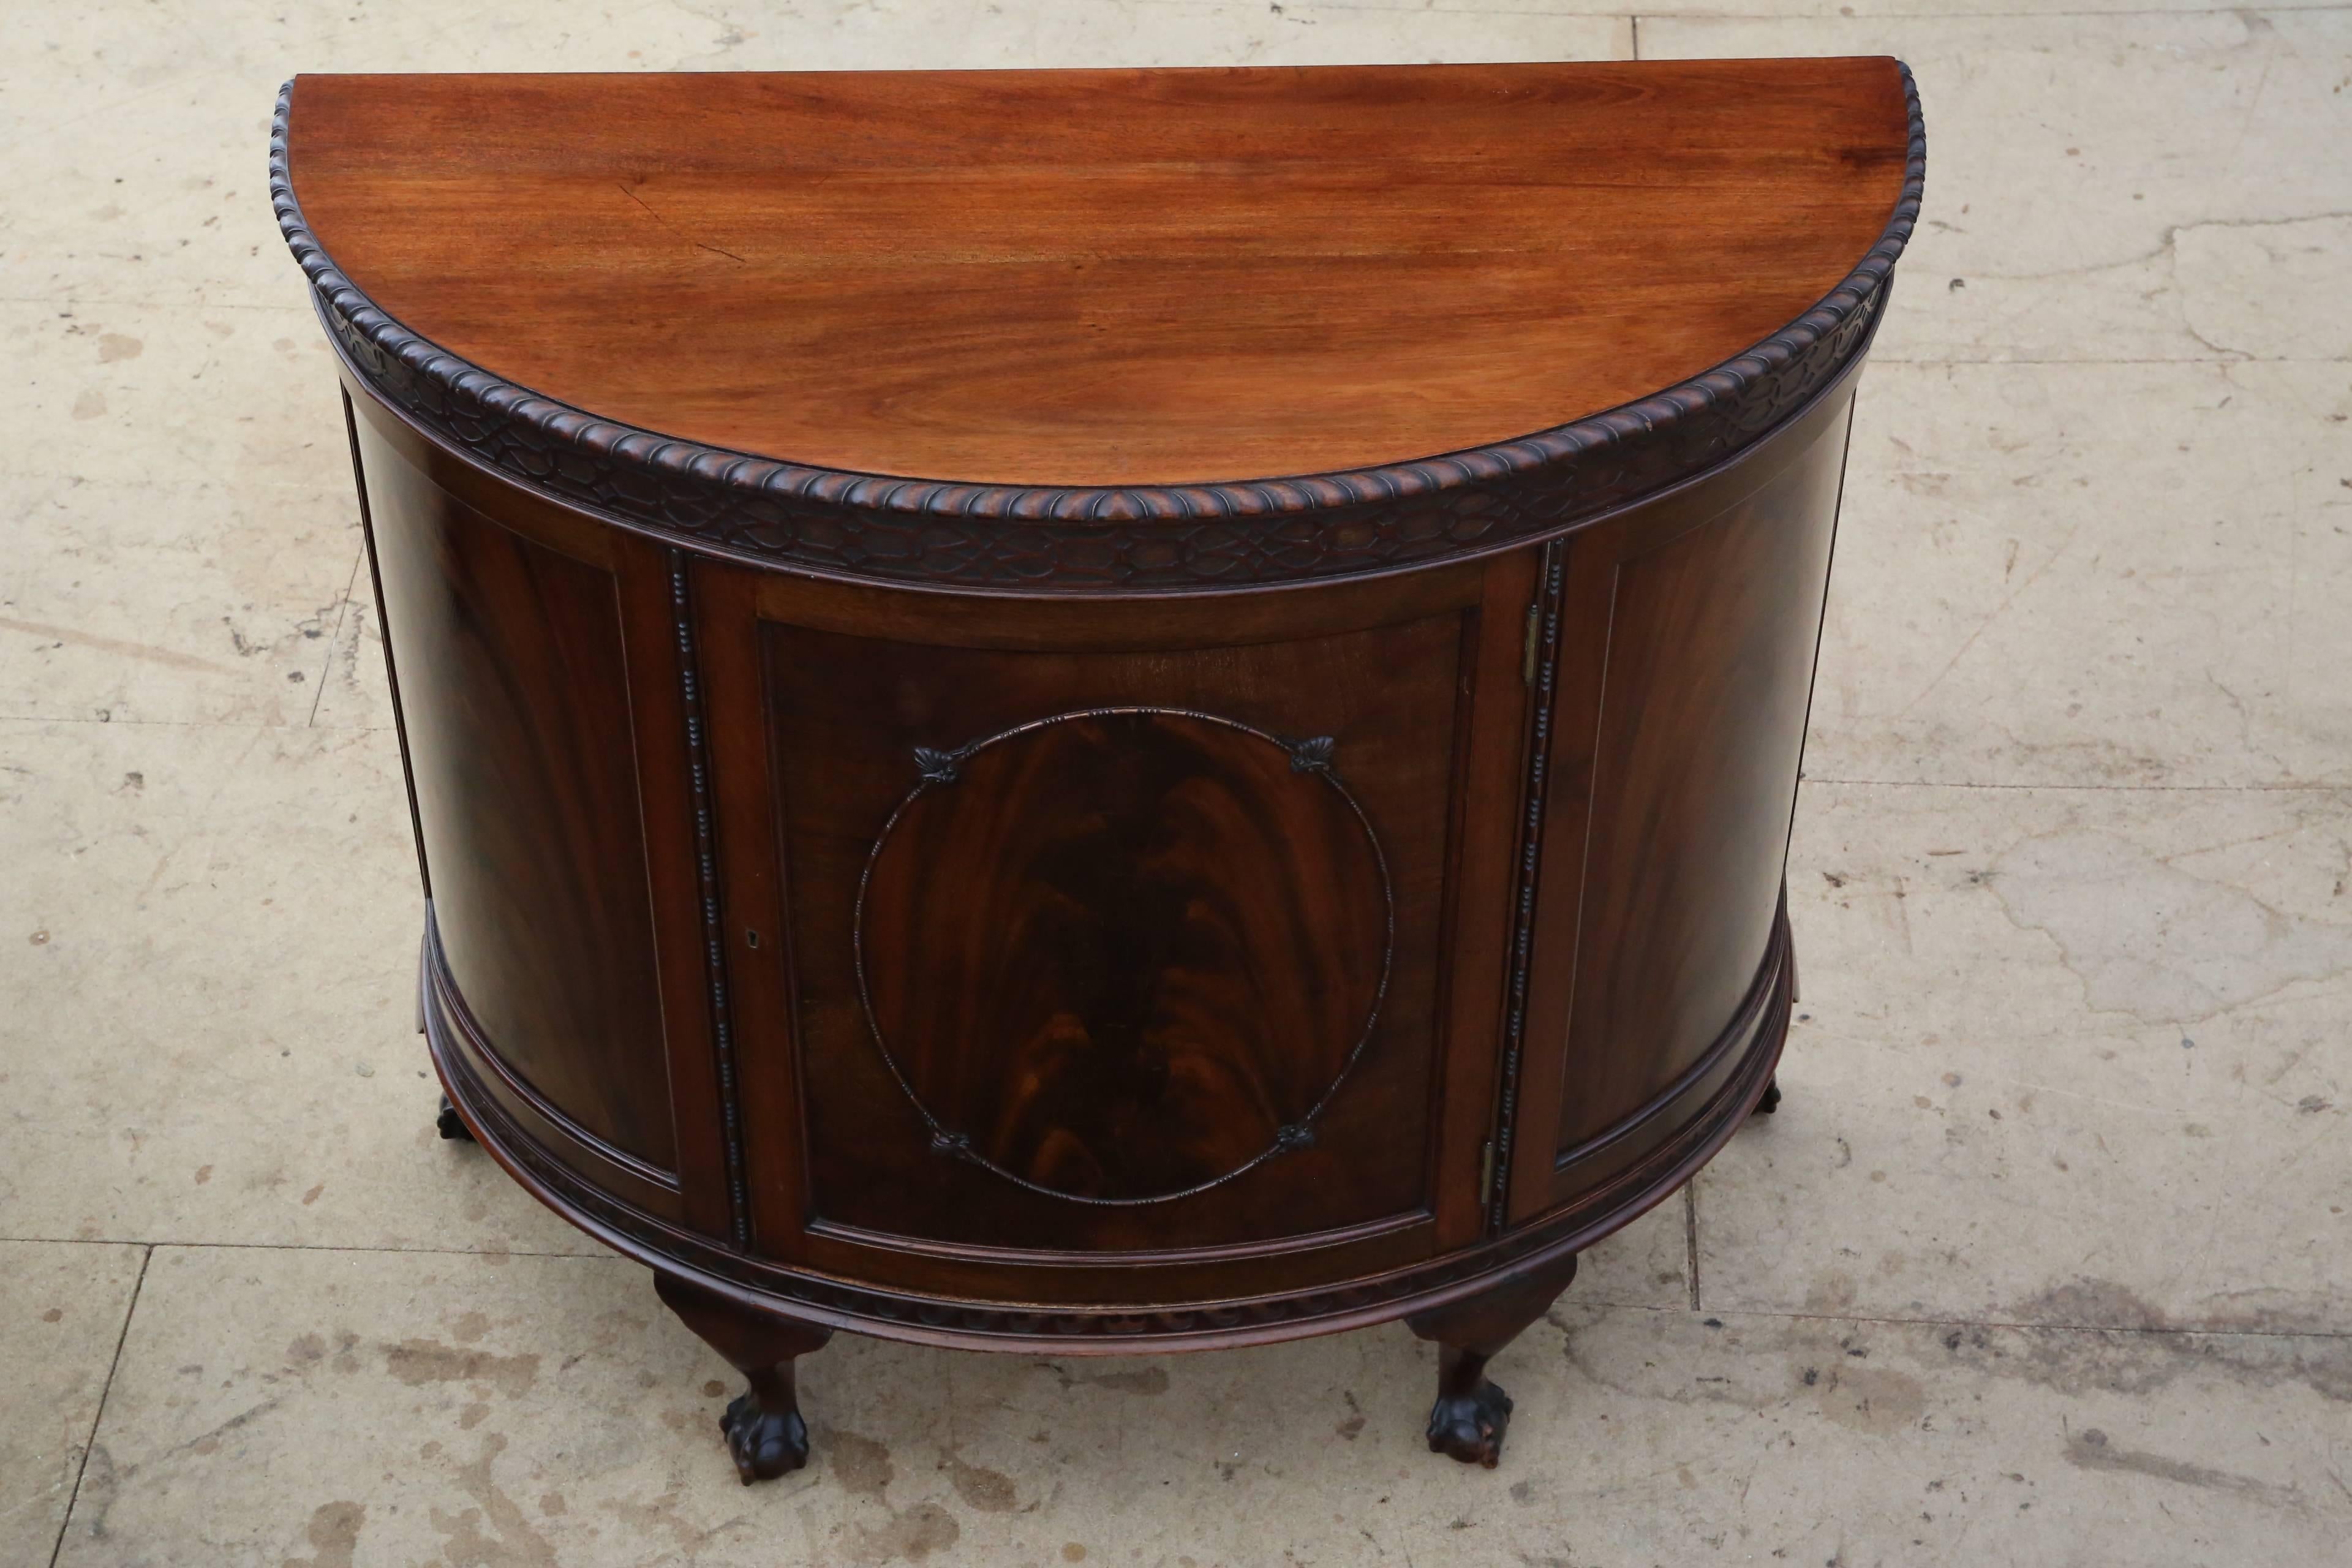 Antique small quality Maple & Co. mahogany sideboard, chiffonier or cupboard that would also double as a console table.

An attractive rare piece of furniture dating from circa 1920. Great blind fret cut frieze.

This is a lovely piece, with